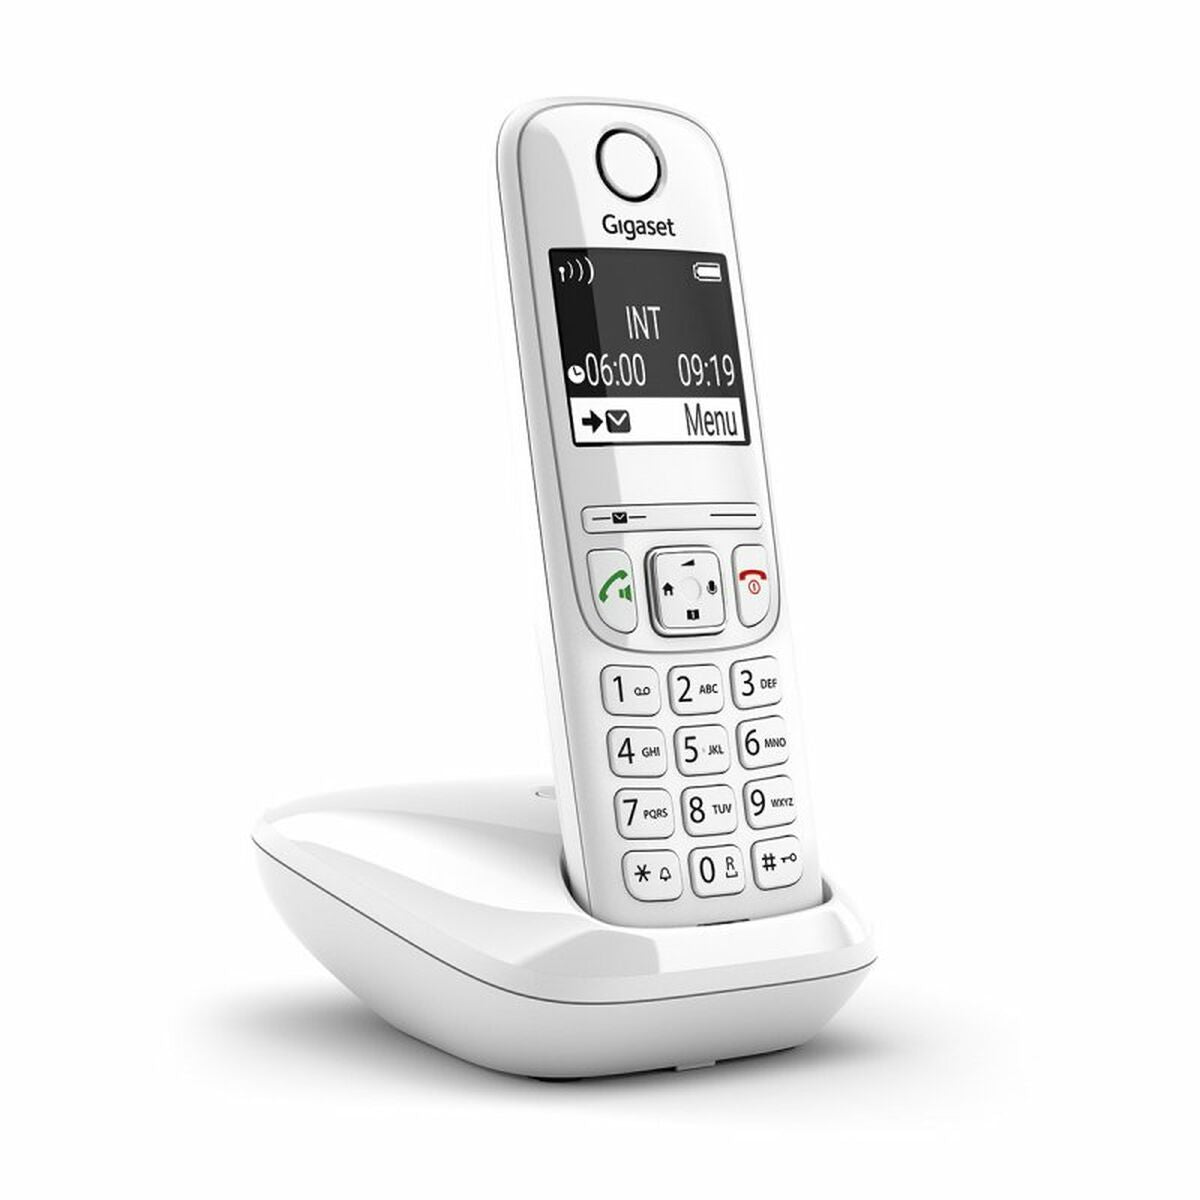 Wireless Phone Gigaset AS690 White, Gigaset, Electronics, Landline telephones and accessories, wireless-phone-gigaset-as690-white, Brand_Gigaset, category-reference-2609, category-reference-2617, category-reference-2619, category-reference-t-18372, category-reference-t-19653, Condition_NEW, office, Price_50 - 100, telephones & tablets, Teleworking, RiotNook